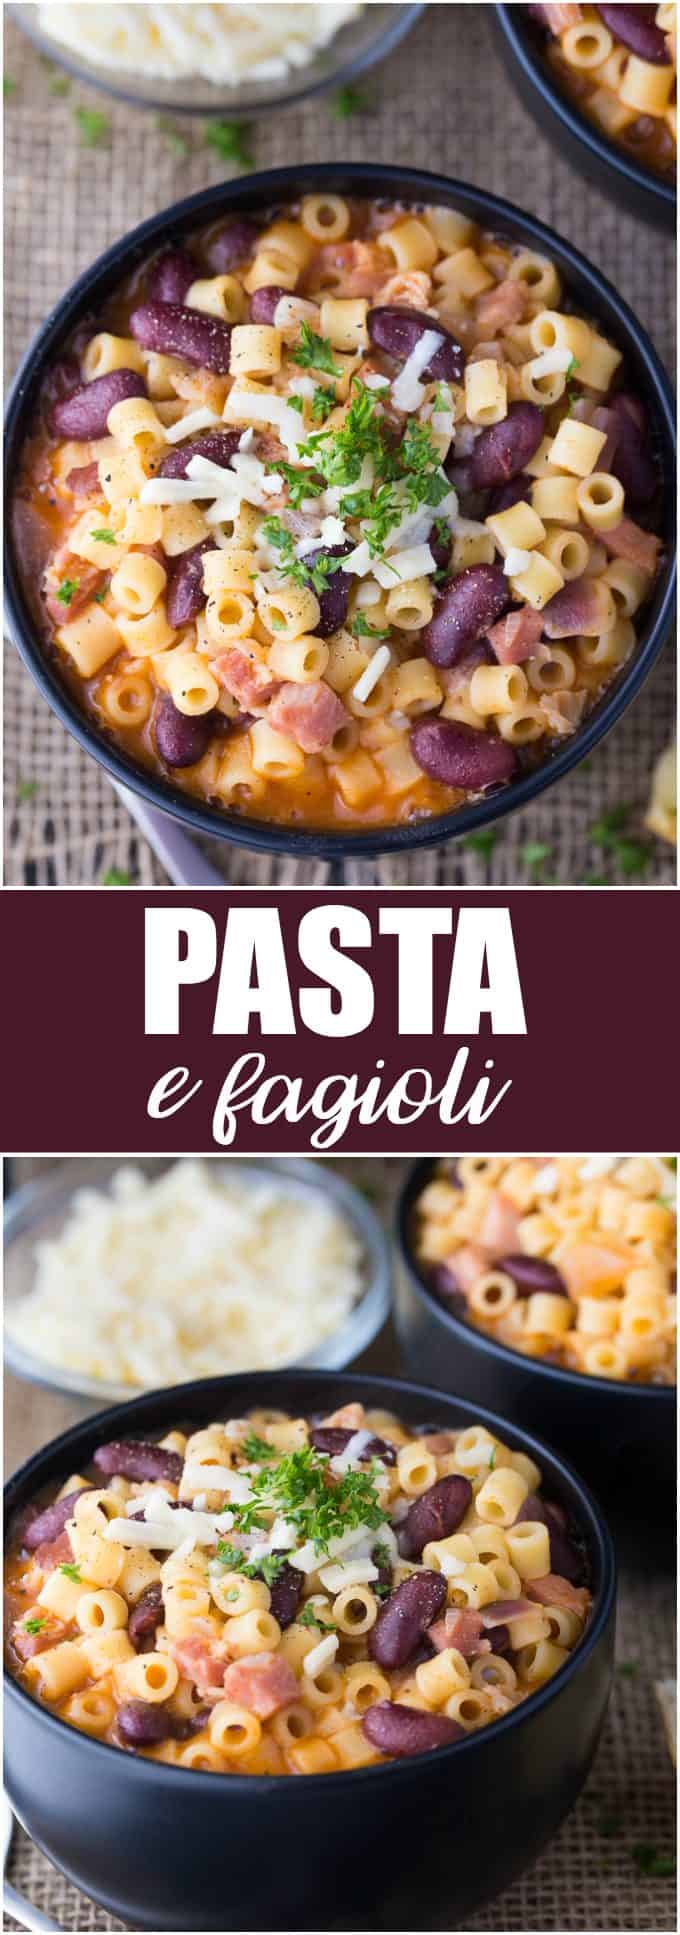 Pasta e Fagioli - This classic Italian noodle soup is so hearty and comforting! Pancetta and kidney beans mixed with fun round noodles and Asiago cheese.